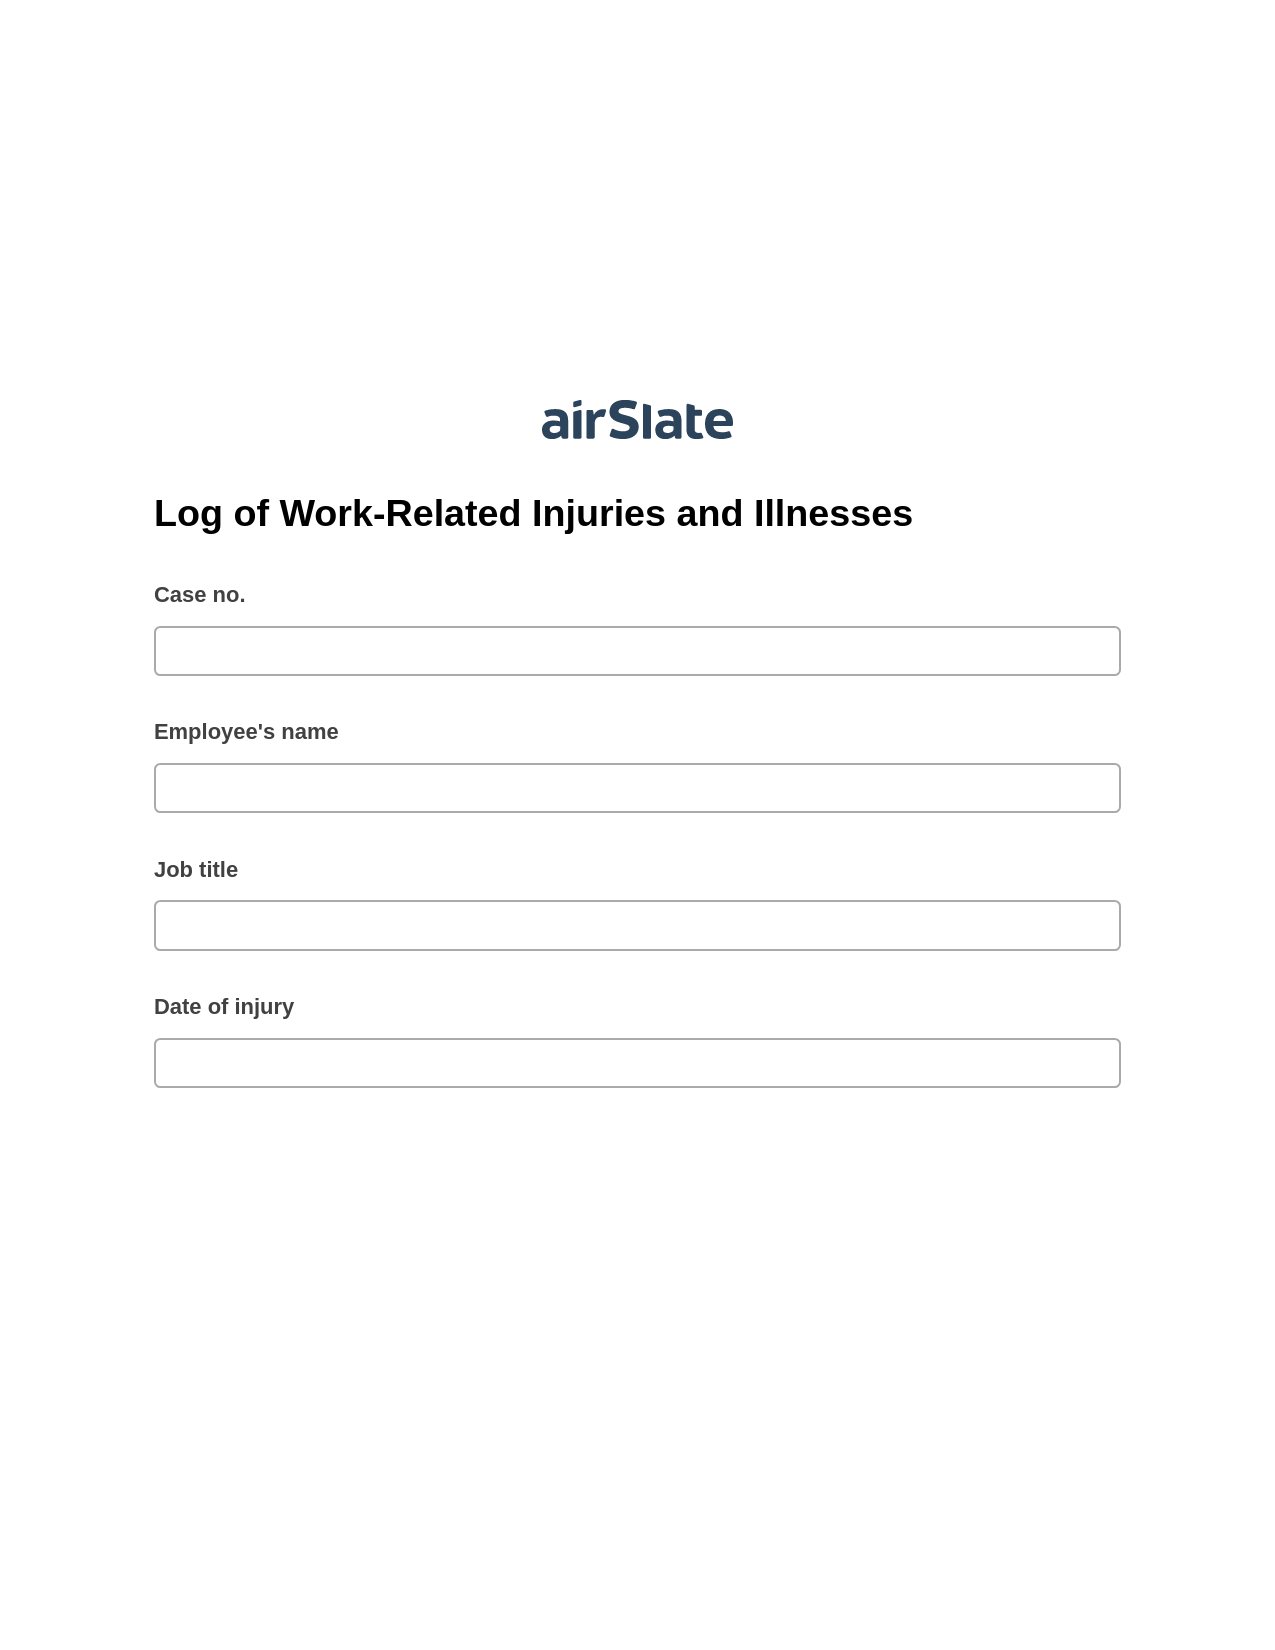 Multirole Log of Work-Related Injuries and Illnesses Pre-fill from Salesforce Record Bot, Unassign Role Bot, OneDrive Bot